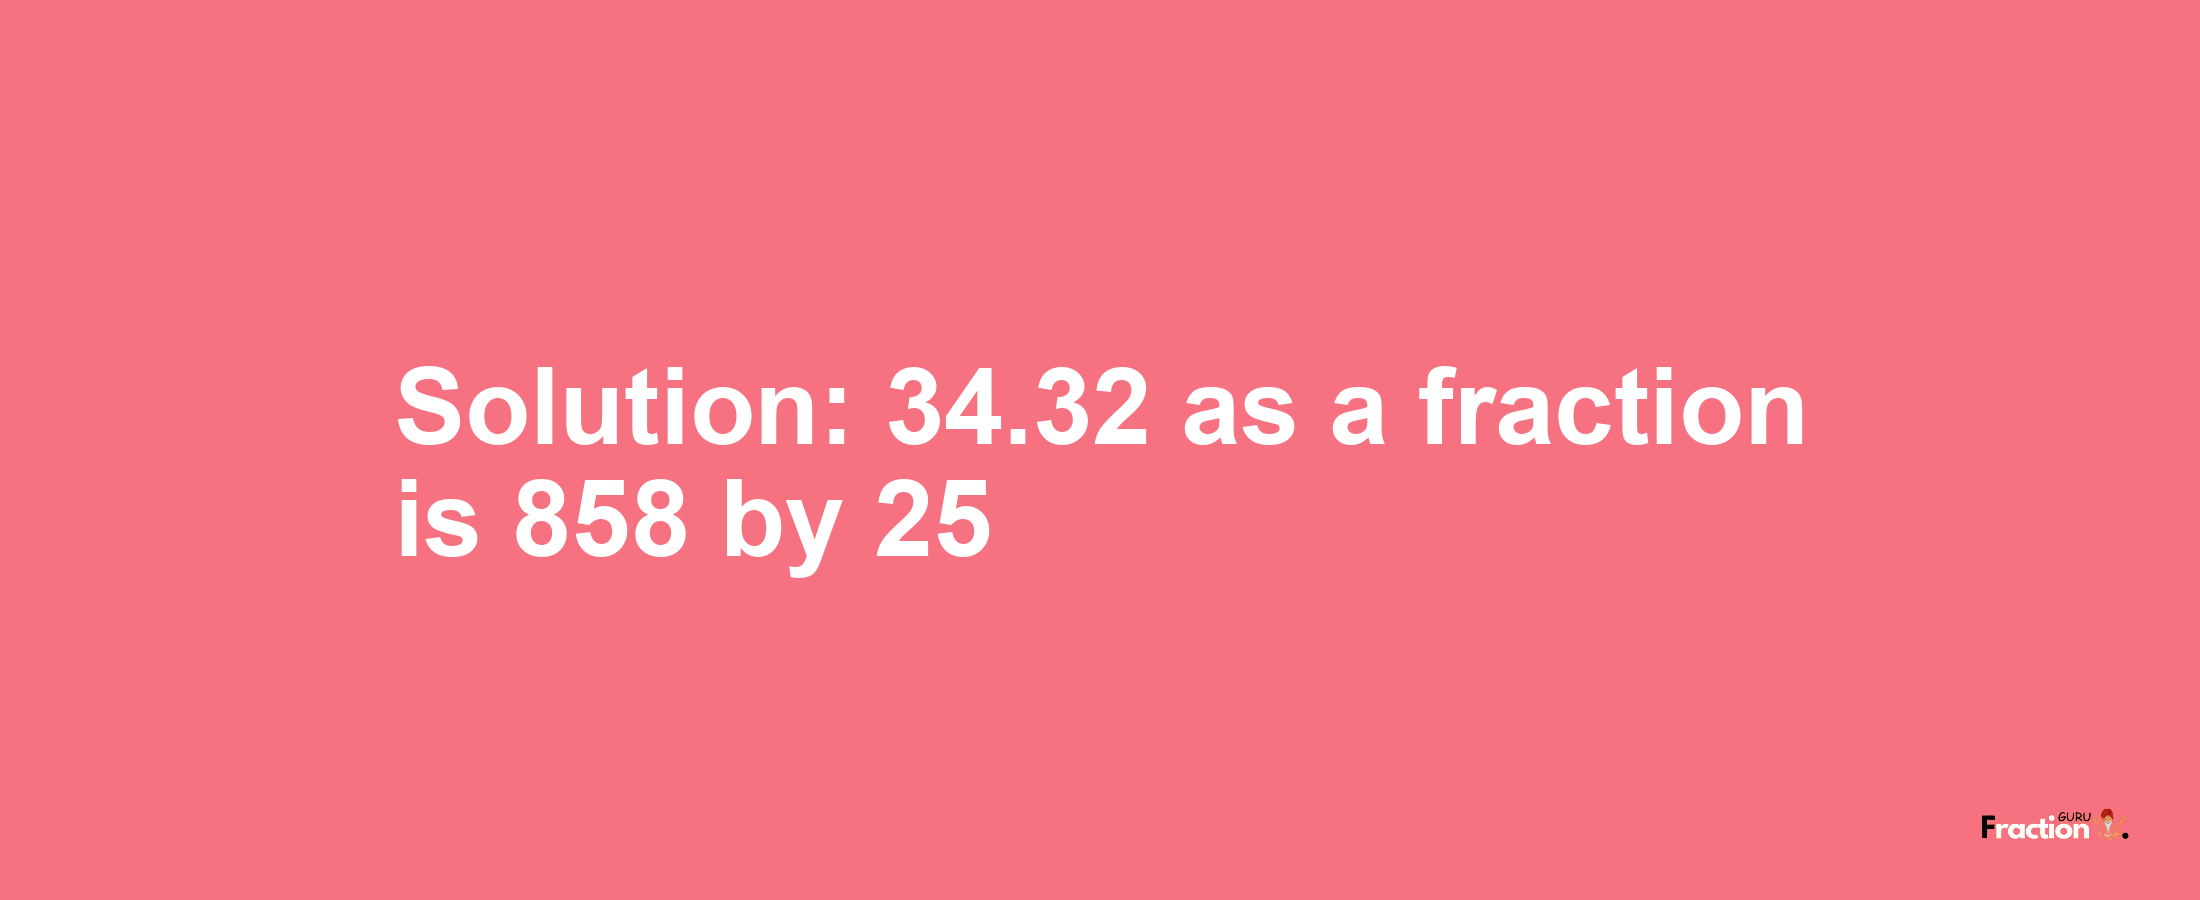 Solution:34.32 as a fraction is 858/25